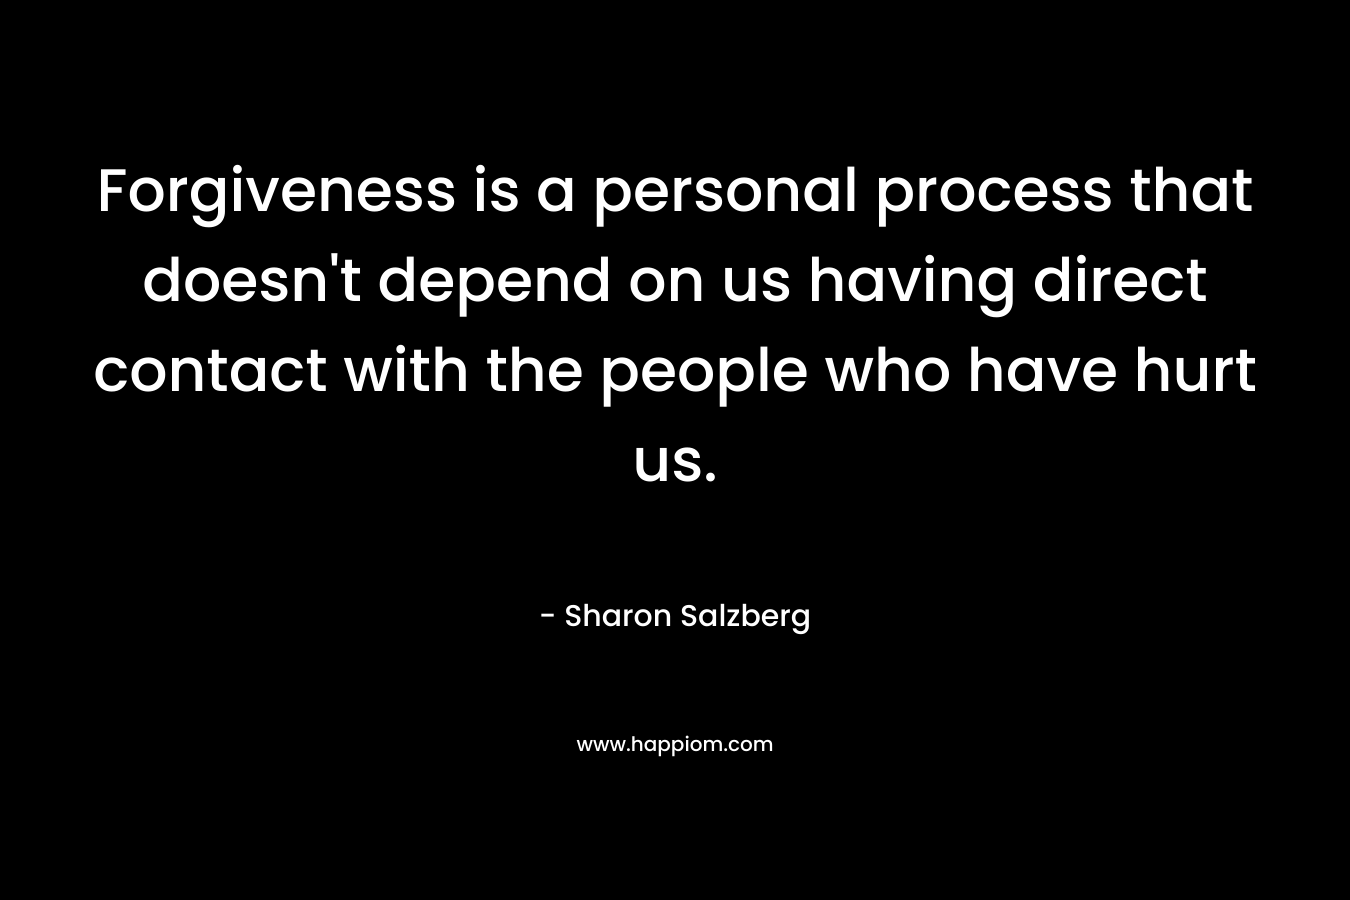 Forgiveness is a personal process that doesn't depend on us having direct contact with the people who have hurt us.